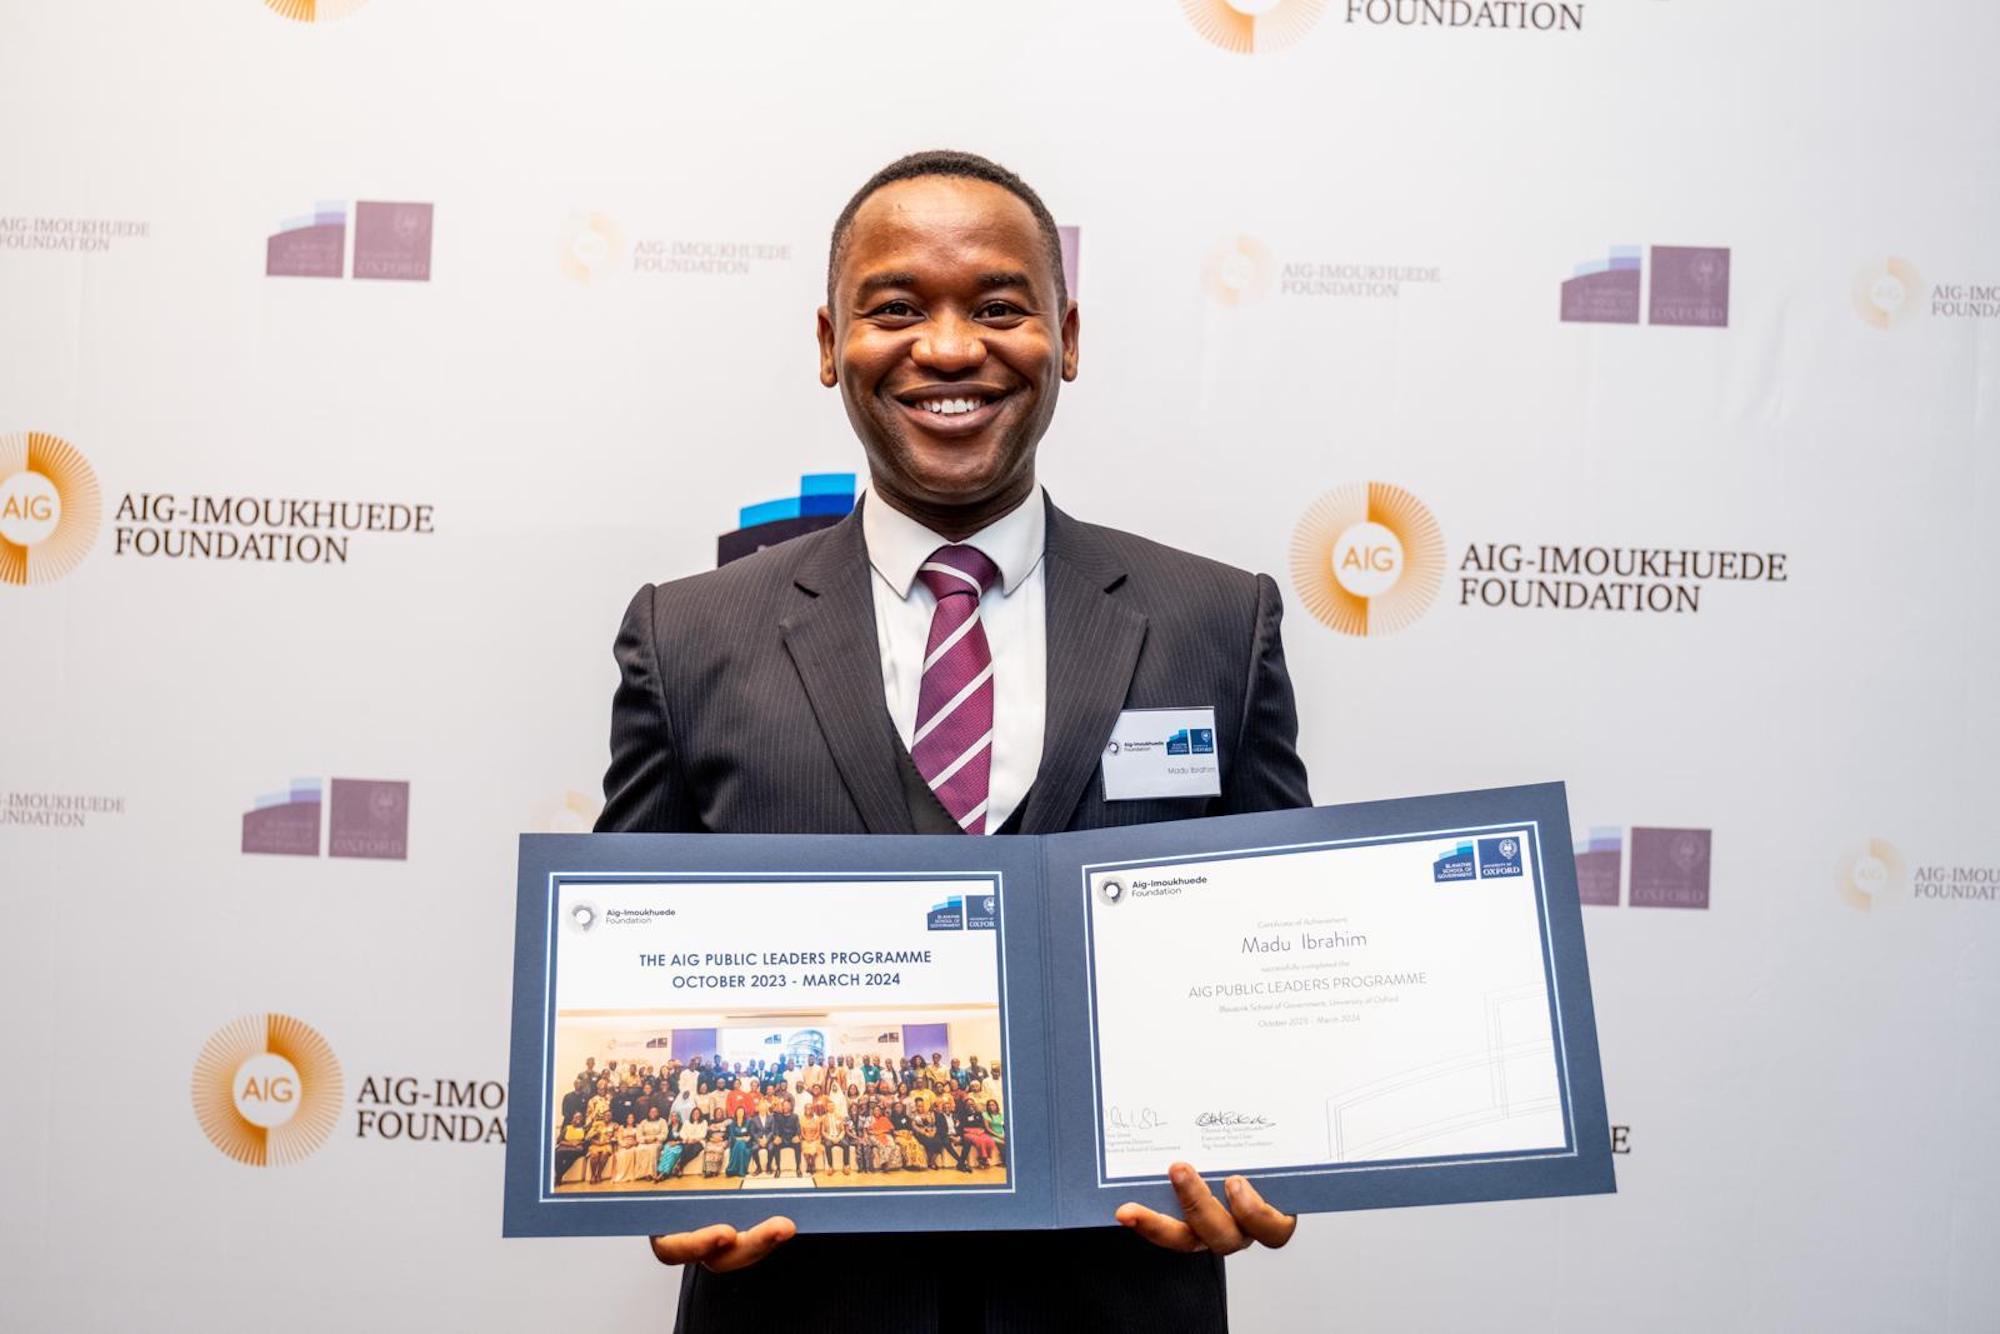 Madu Ibrahim with his AIG certificate